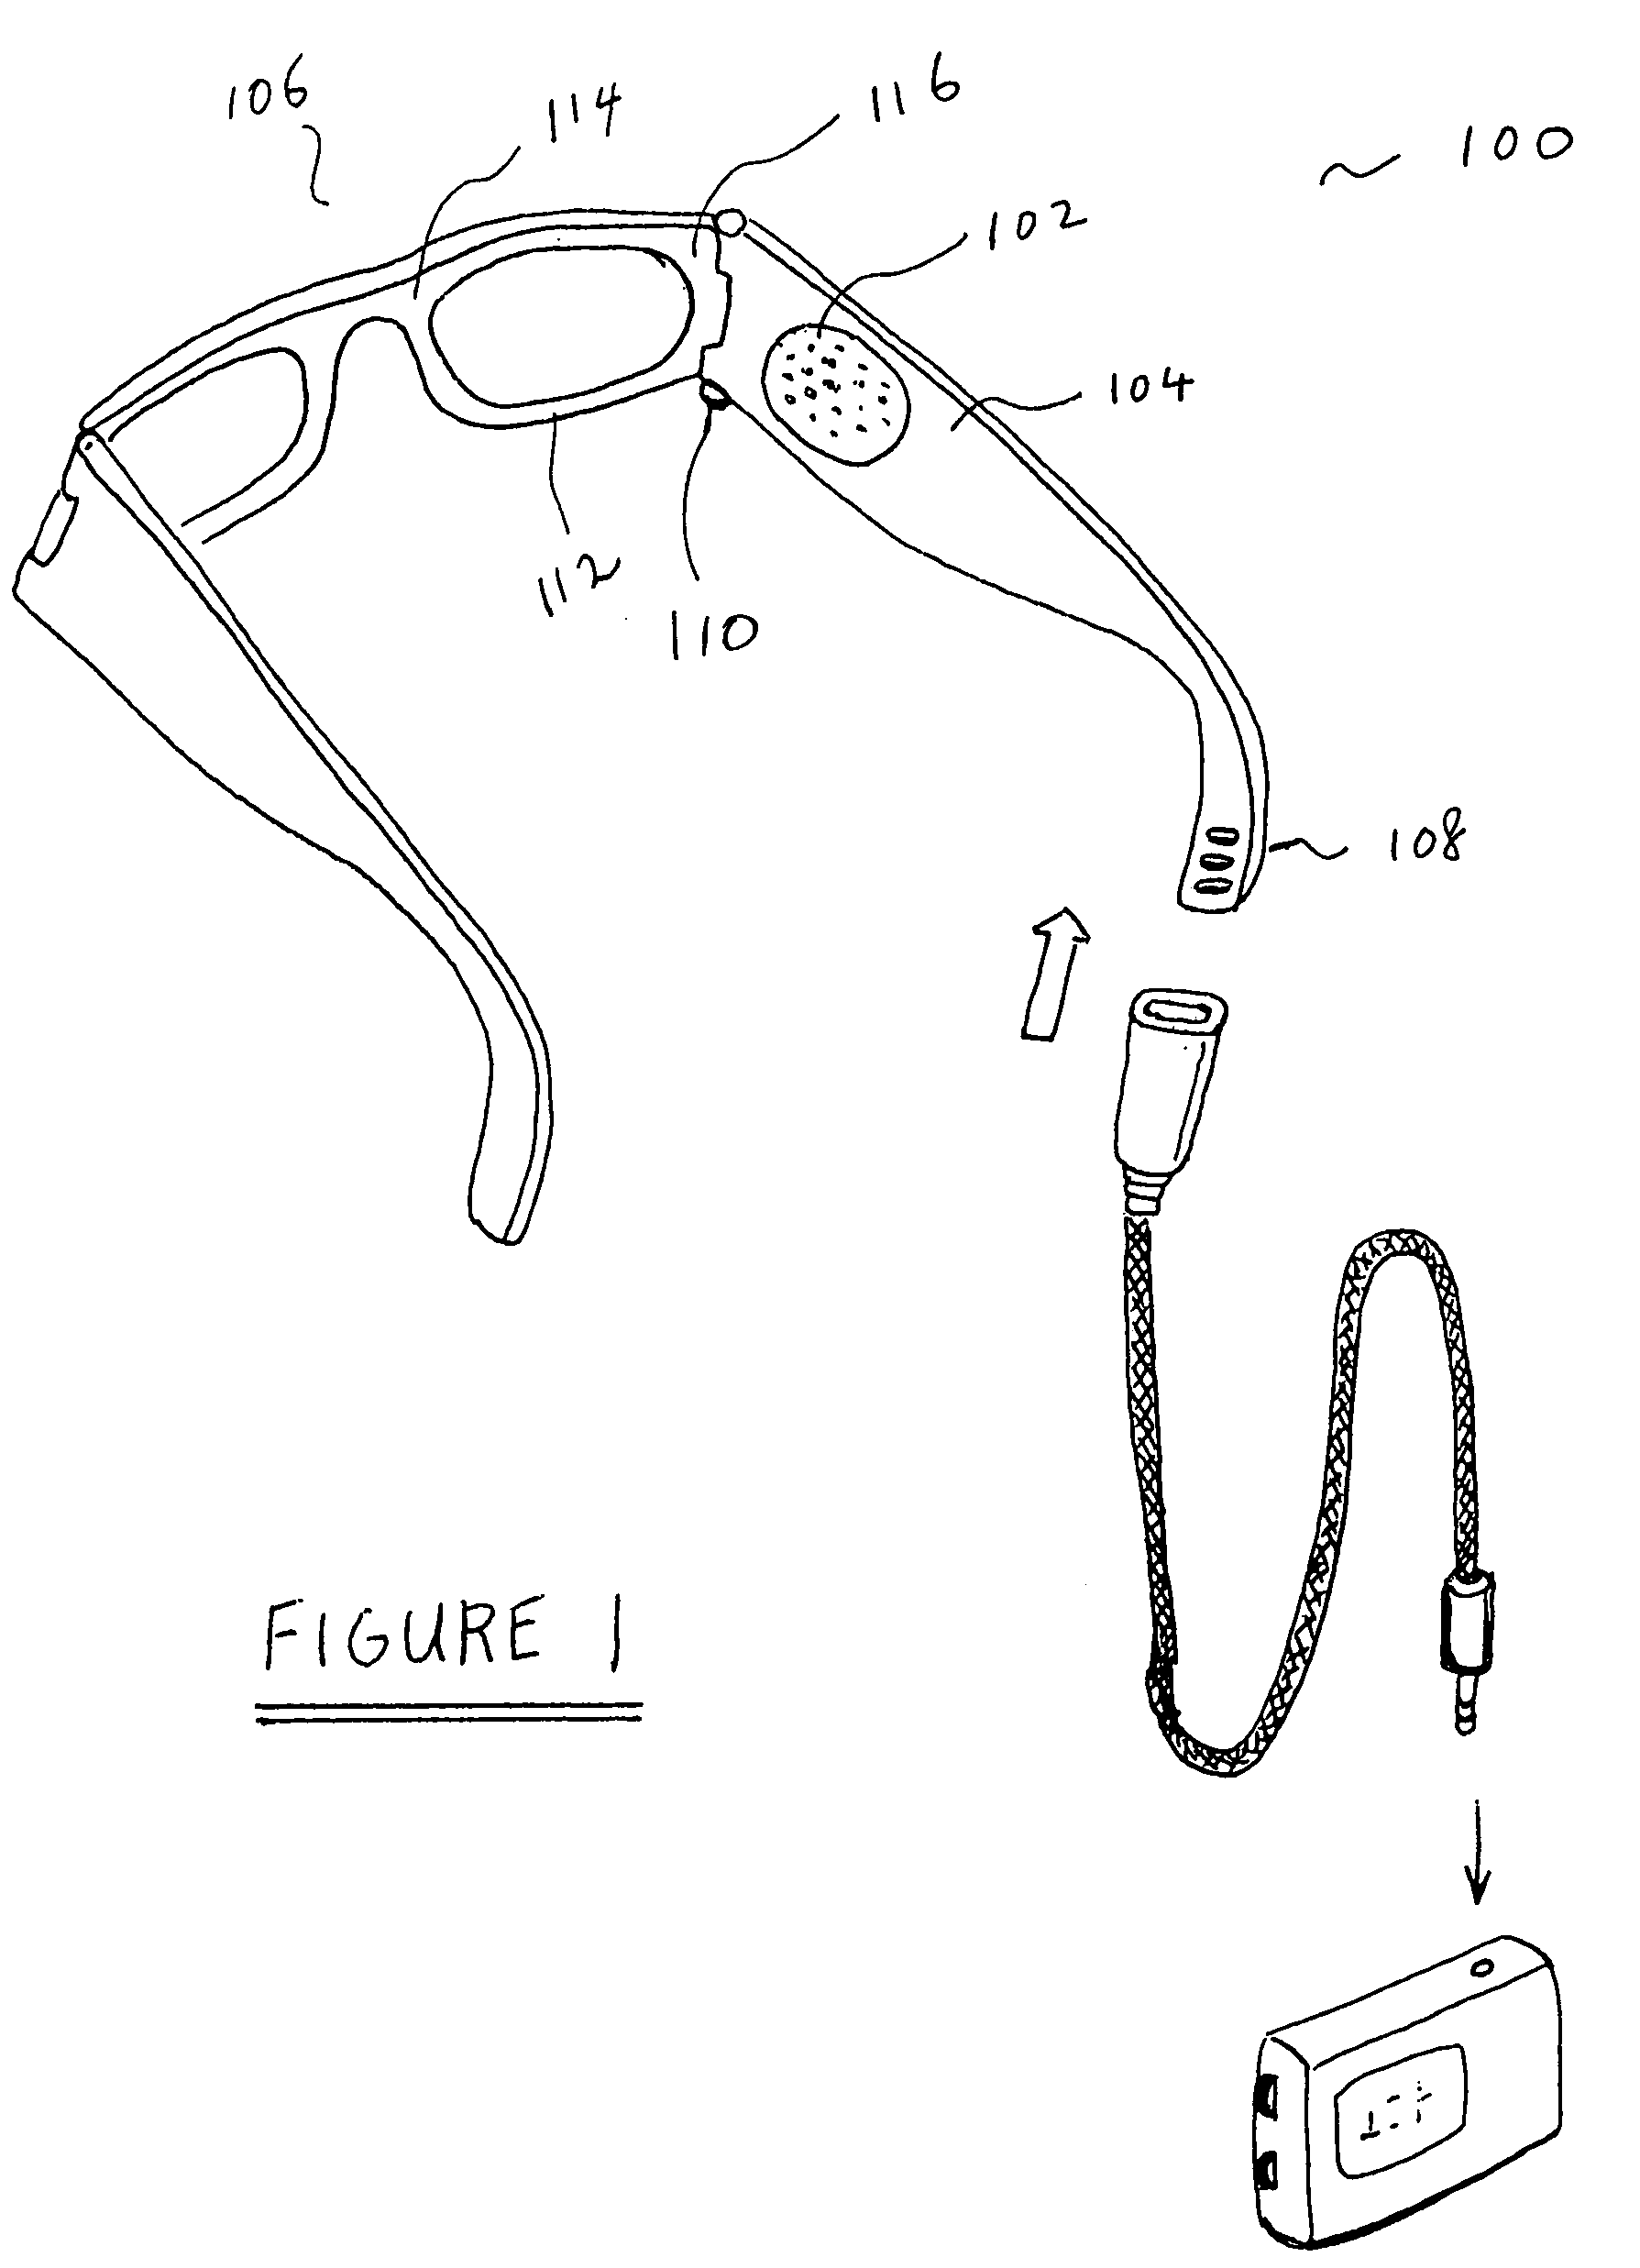 Eyeglasses with electrical components